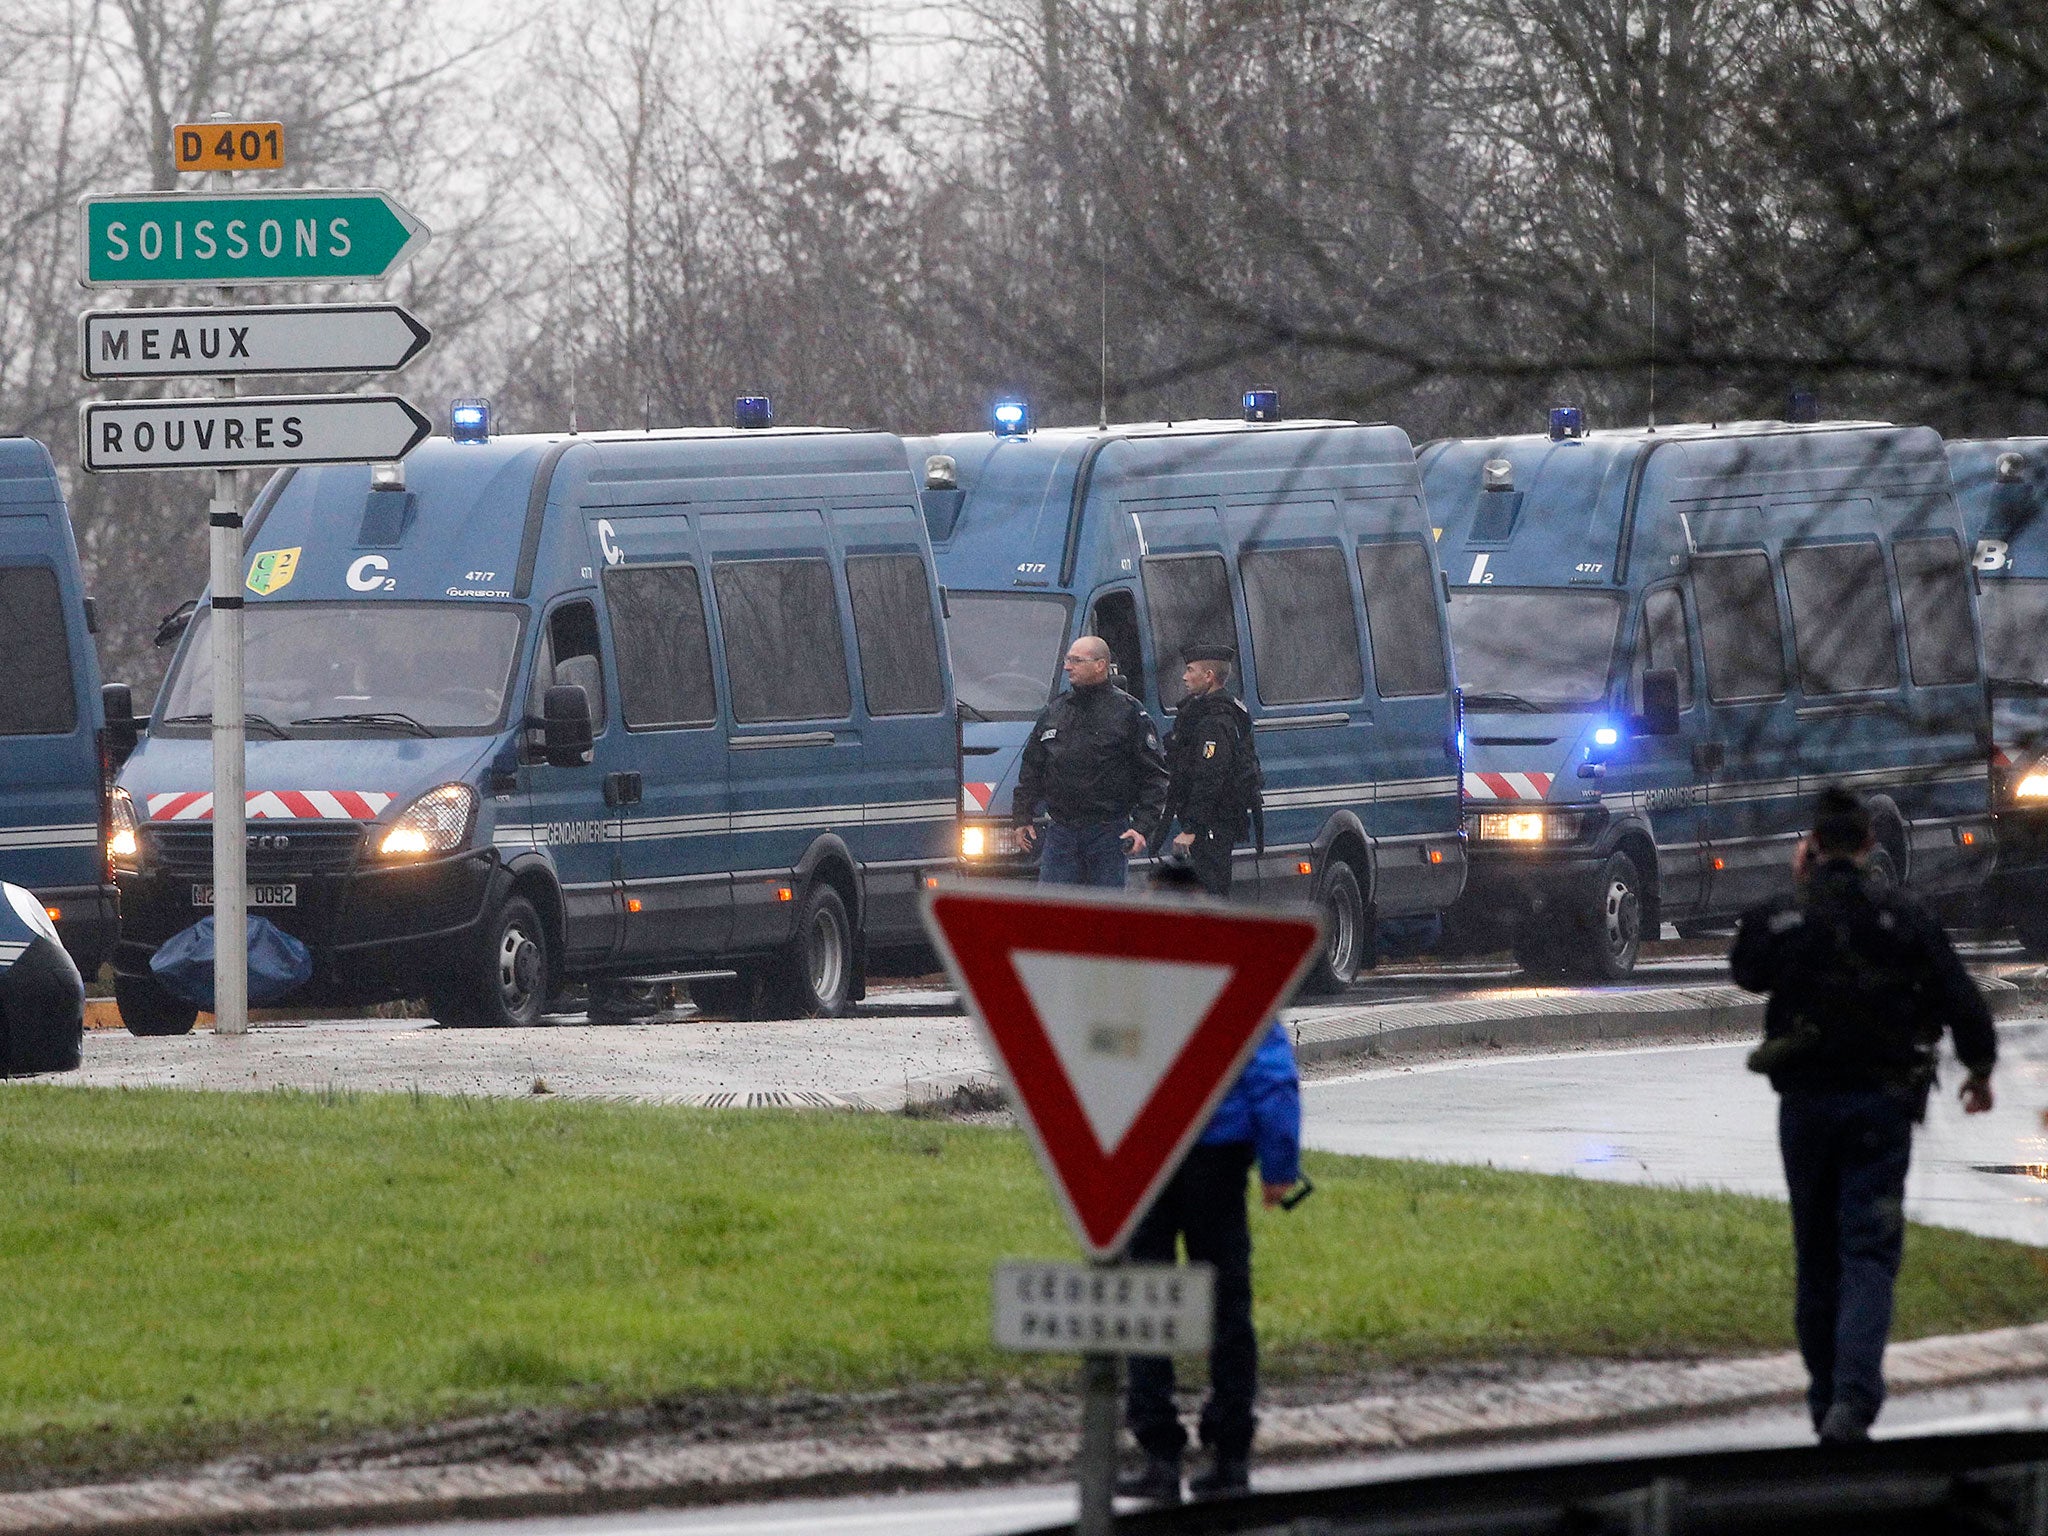 Police vans are lined up in Dammartin-en-Goele, northeast Paris, as part of an operation to seize two heavily armed suspects